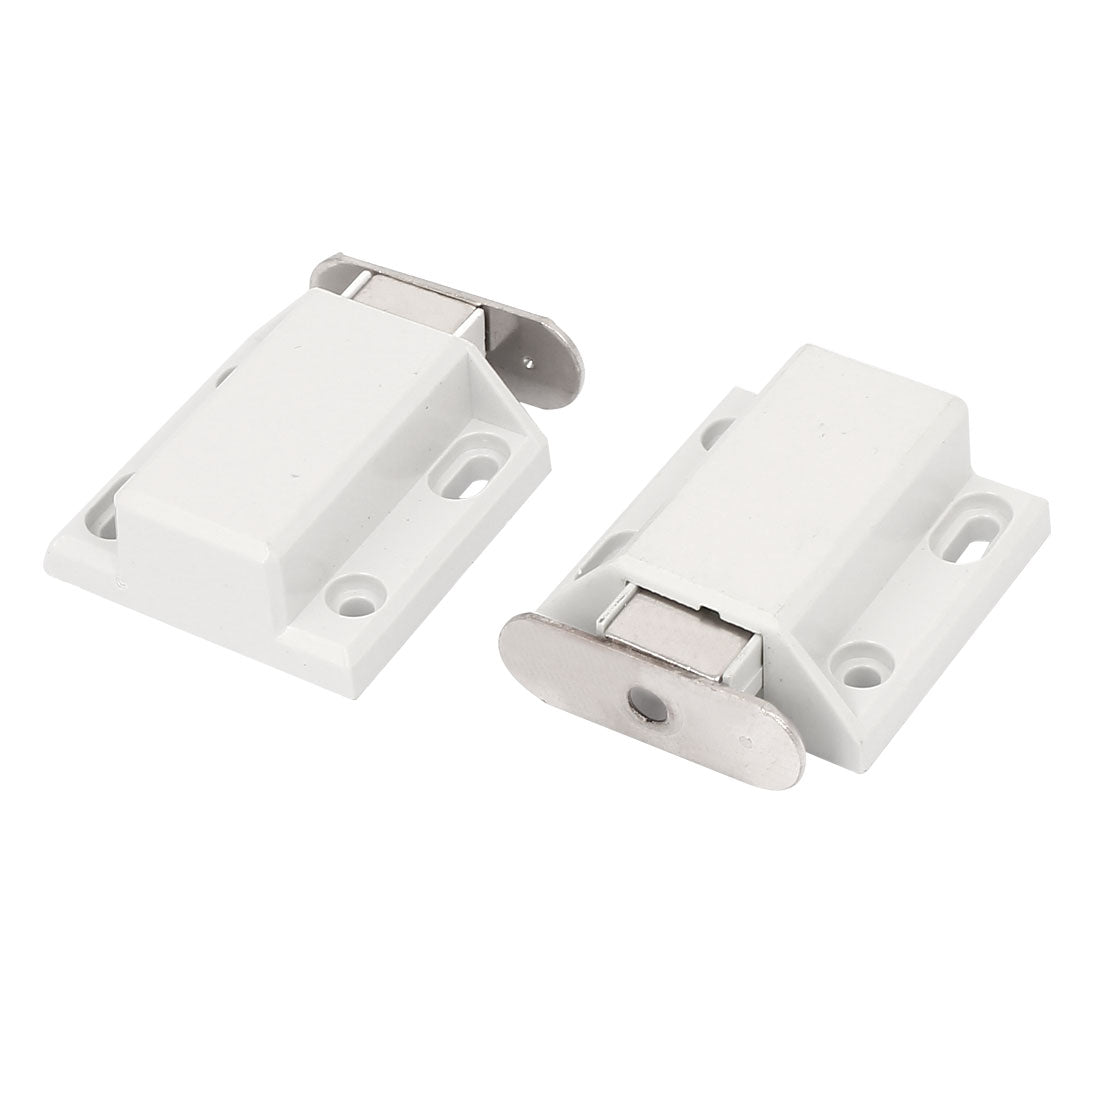 uxcell Uxcell Furniture Cabinet Door Push Open Magnetic Catch Latch White 2pcs